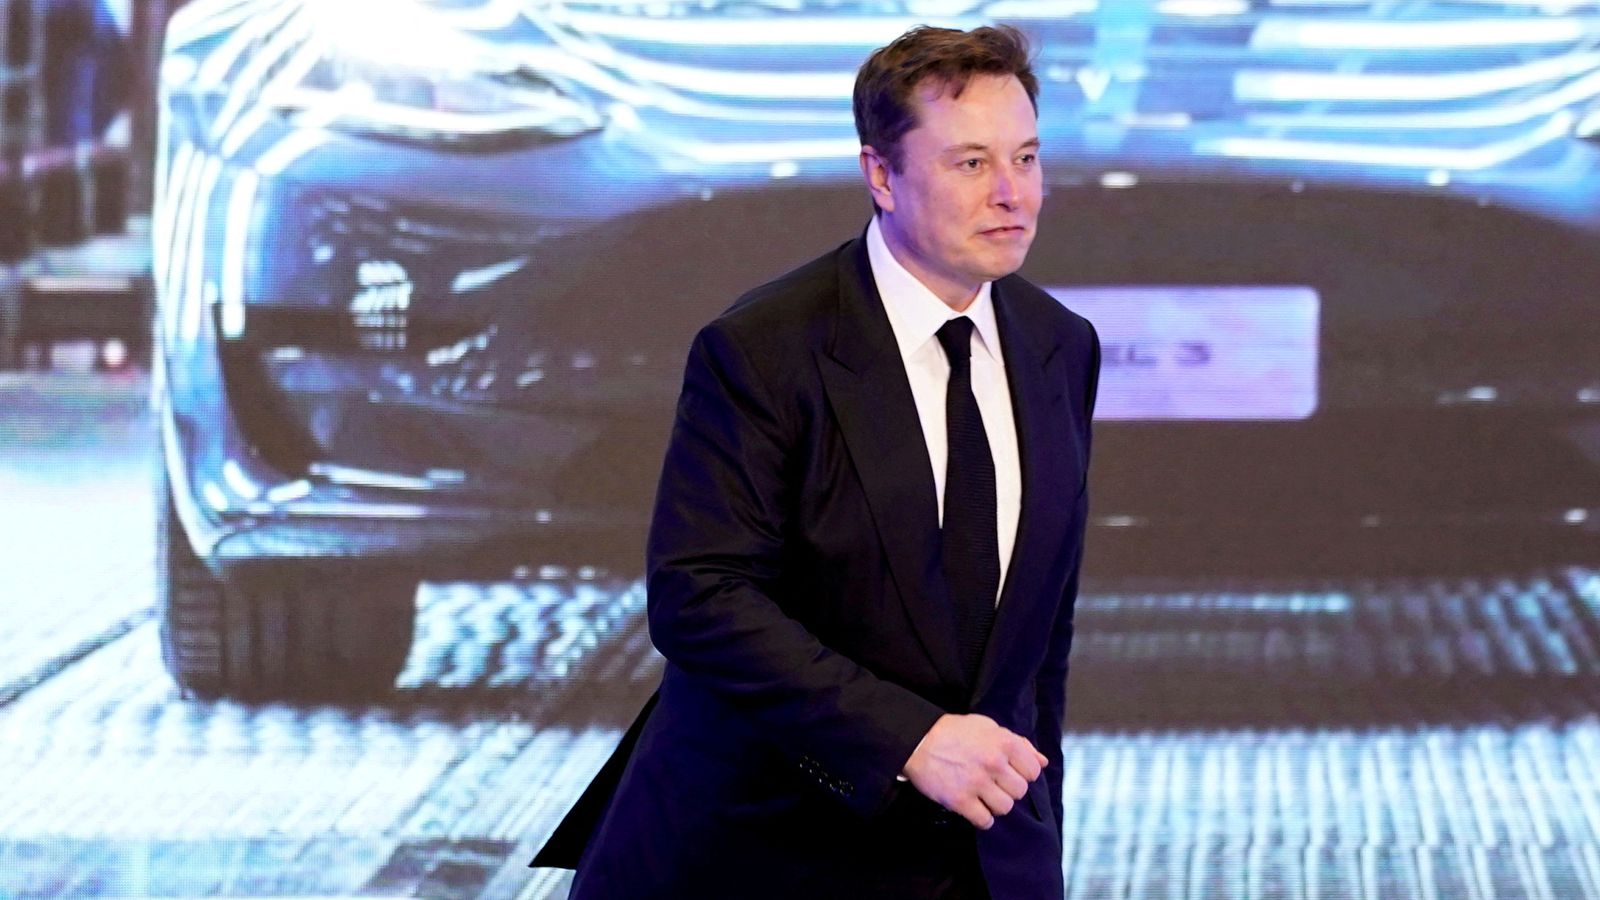 China thanks Elon Musk for Taiwan tweet - but Taipei insists 'our freedom is not for sale'